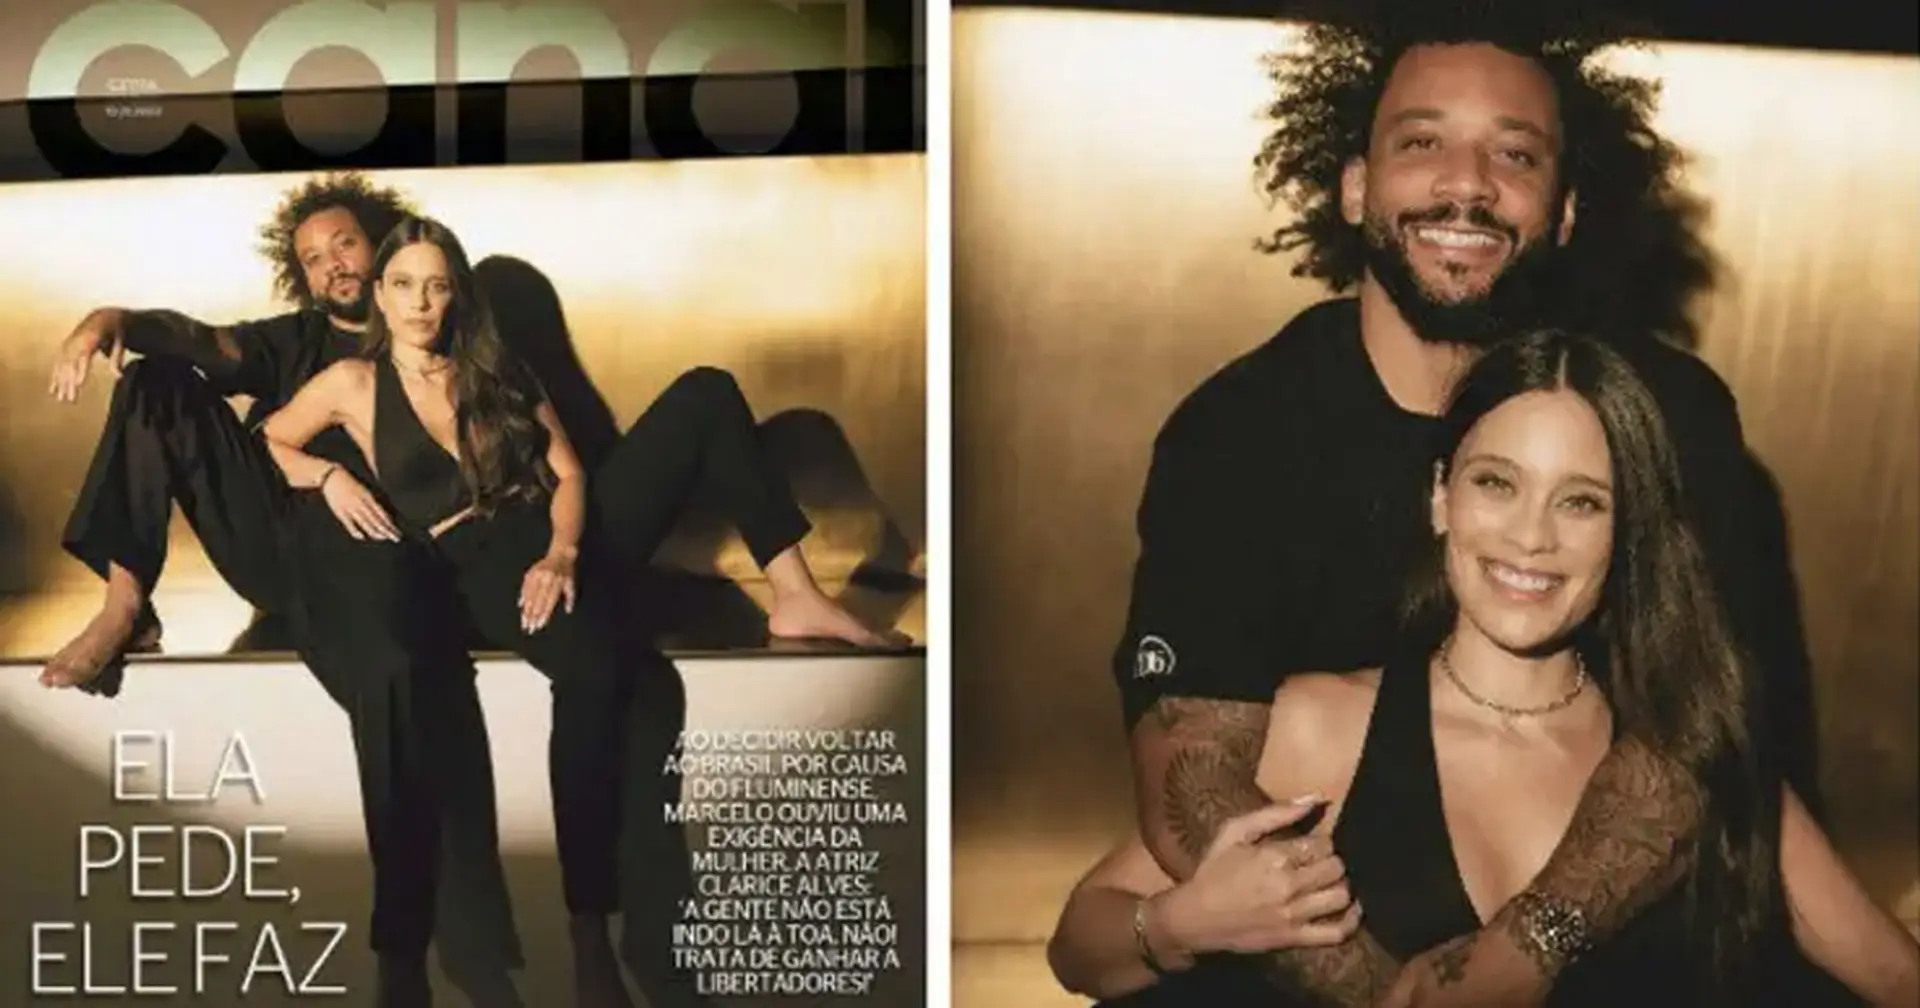 Most beautiful Brazilian couple in Madrid's history: Marcelo and his wife feature in a beautiful photoshoot